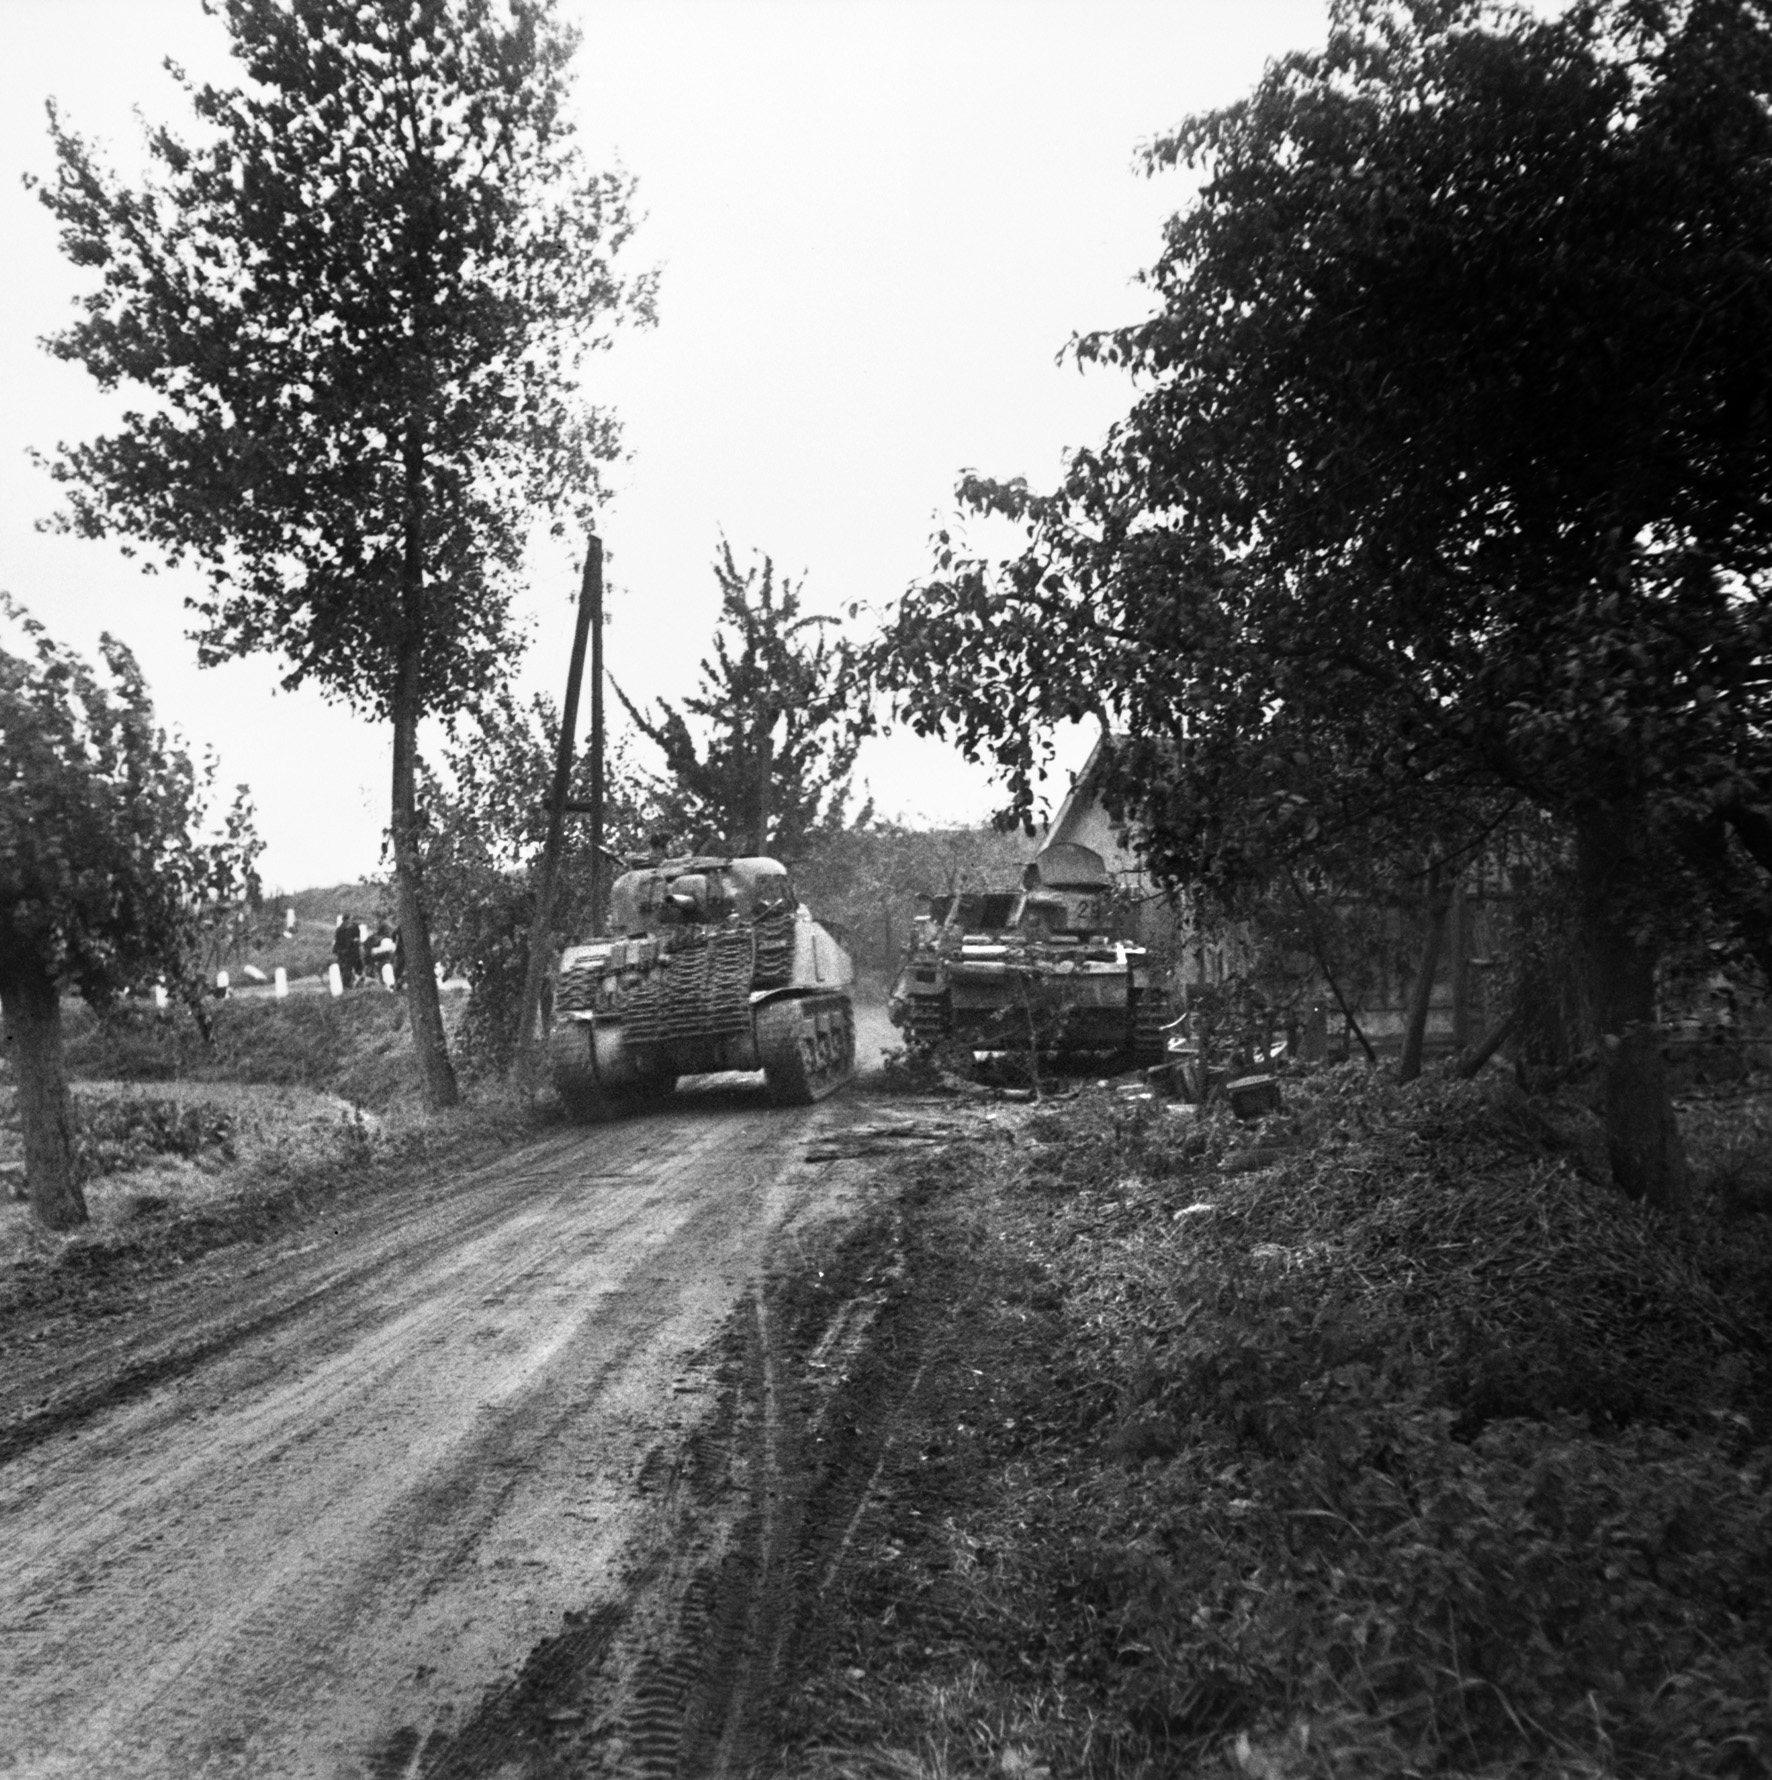 A British M4 Sherman medium tank of the 47th/7th Dragoon Guards passes the wreckage of a German PzKpfw. III tank along a dirt road on the edge of the Dutch village of Oosterhout. 